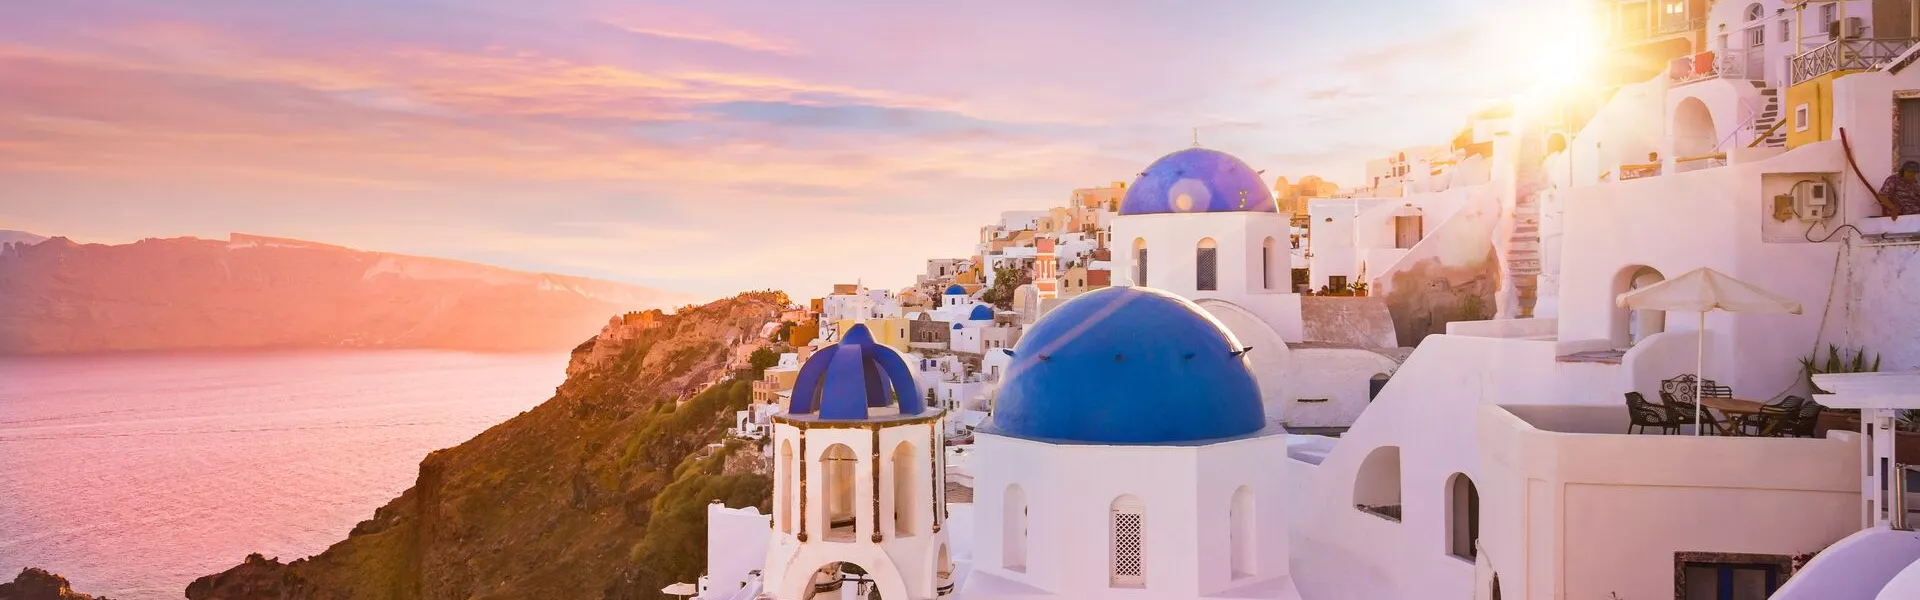 Large Sunset View Of The Blue Dome Churches Of Santorini, Greece 900706462